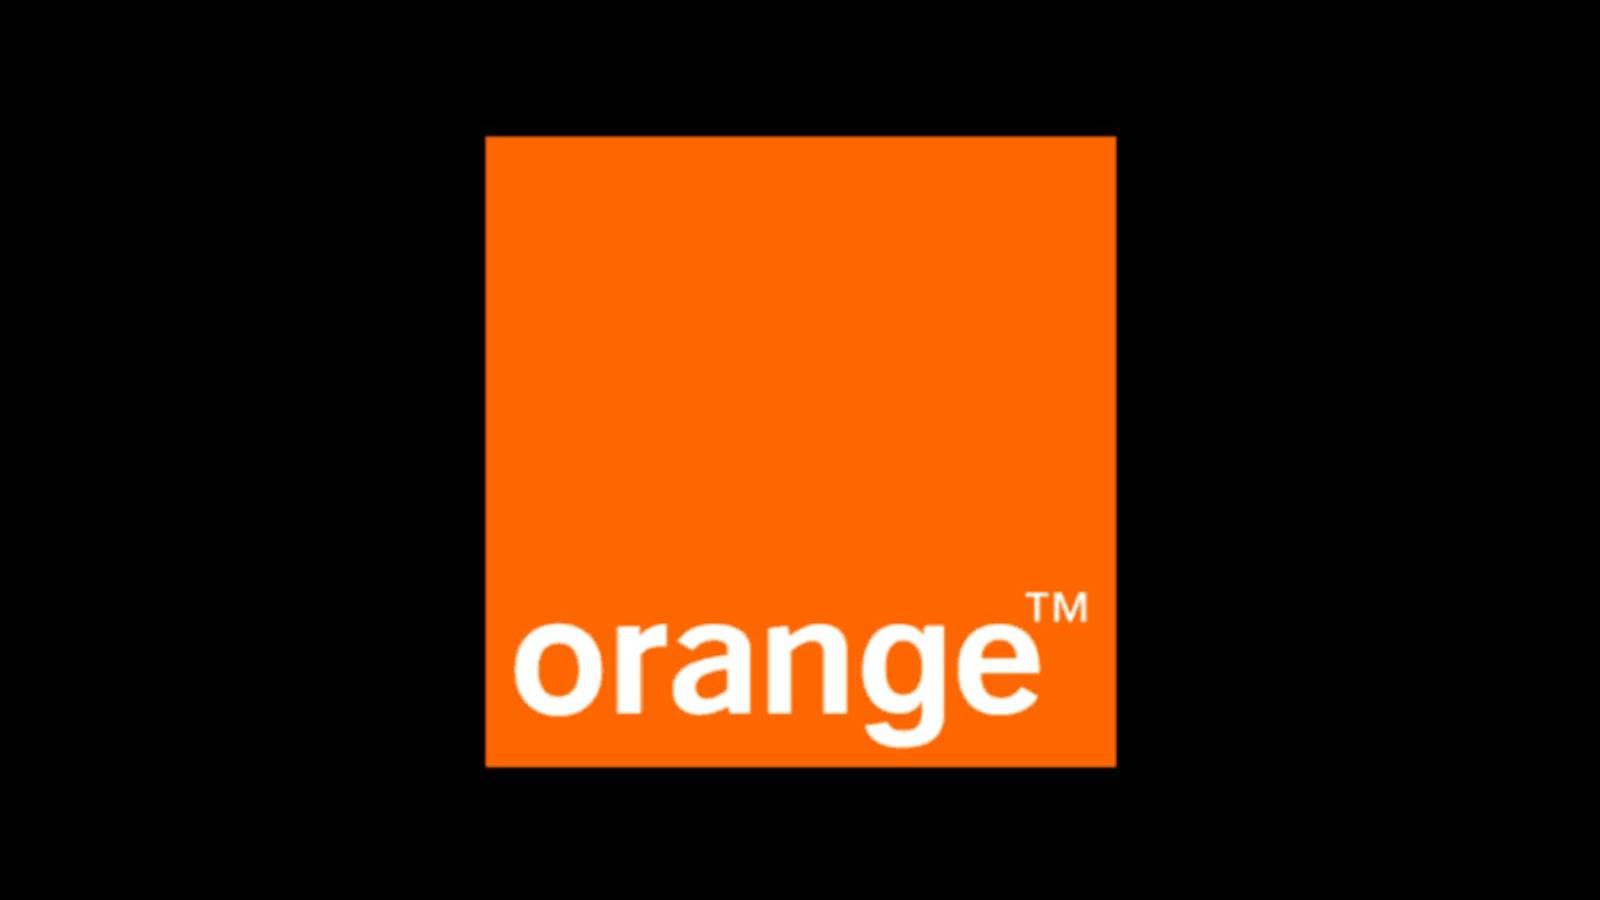 Orange Official Decision LAST TIME Spring Targets Romanian Customers